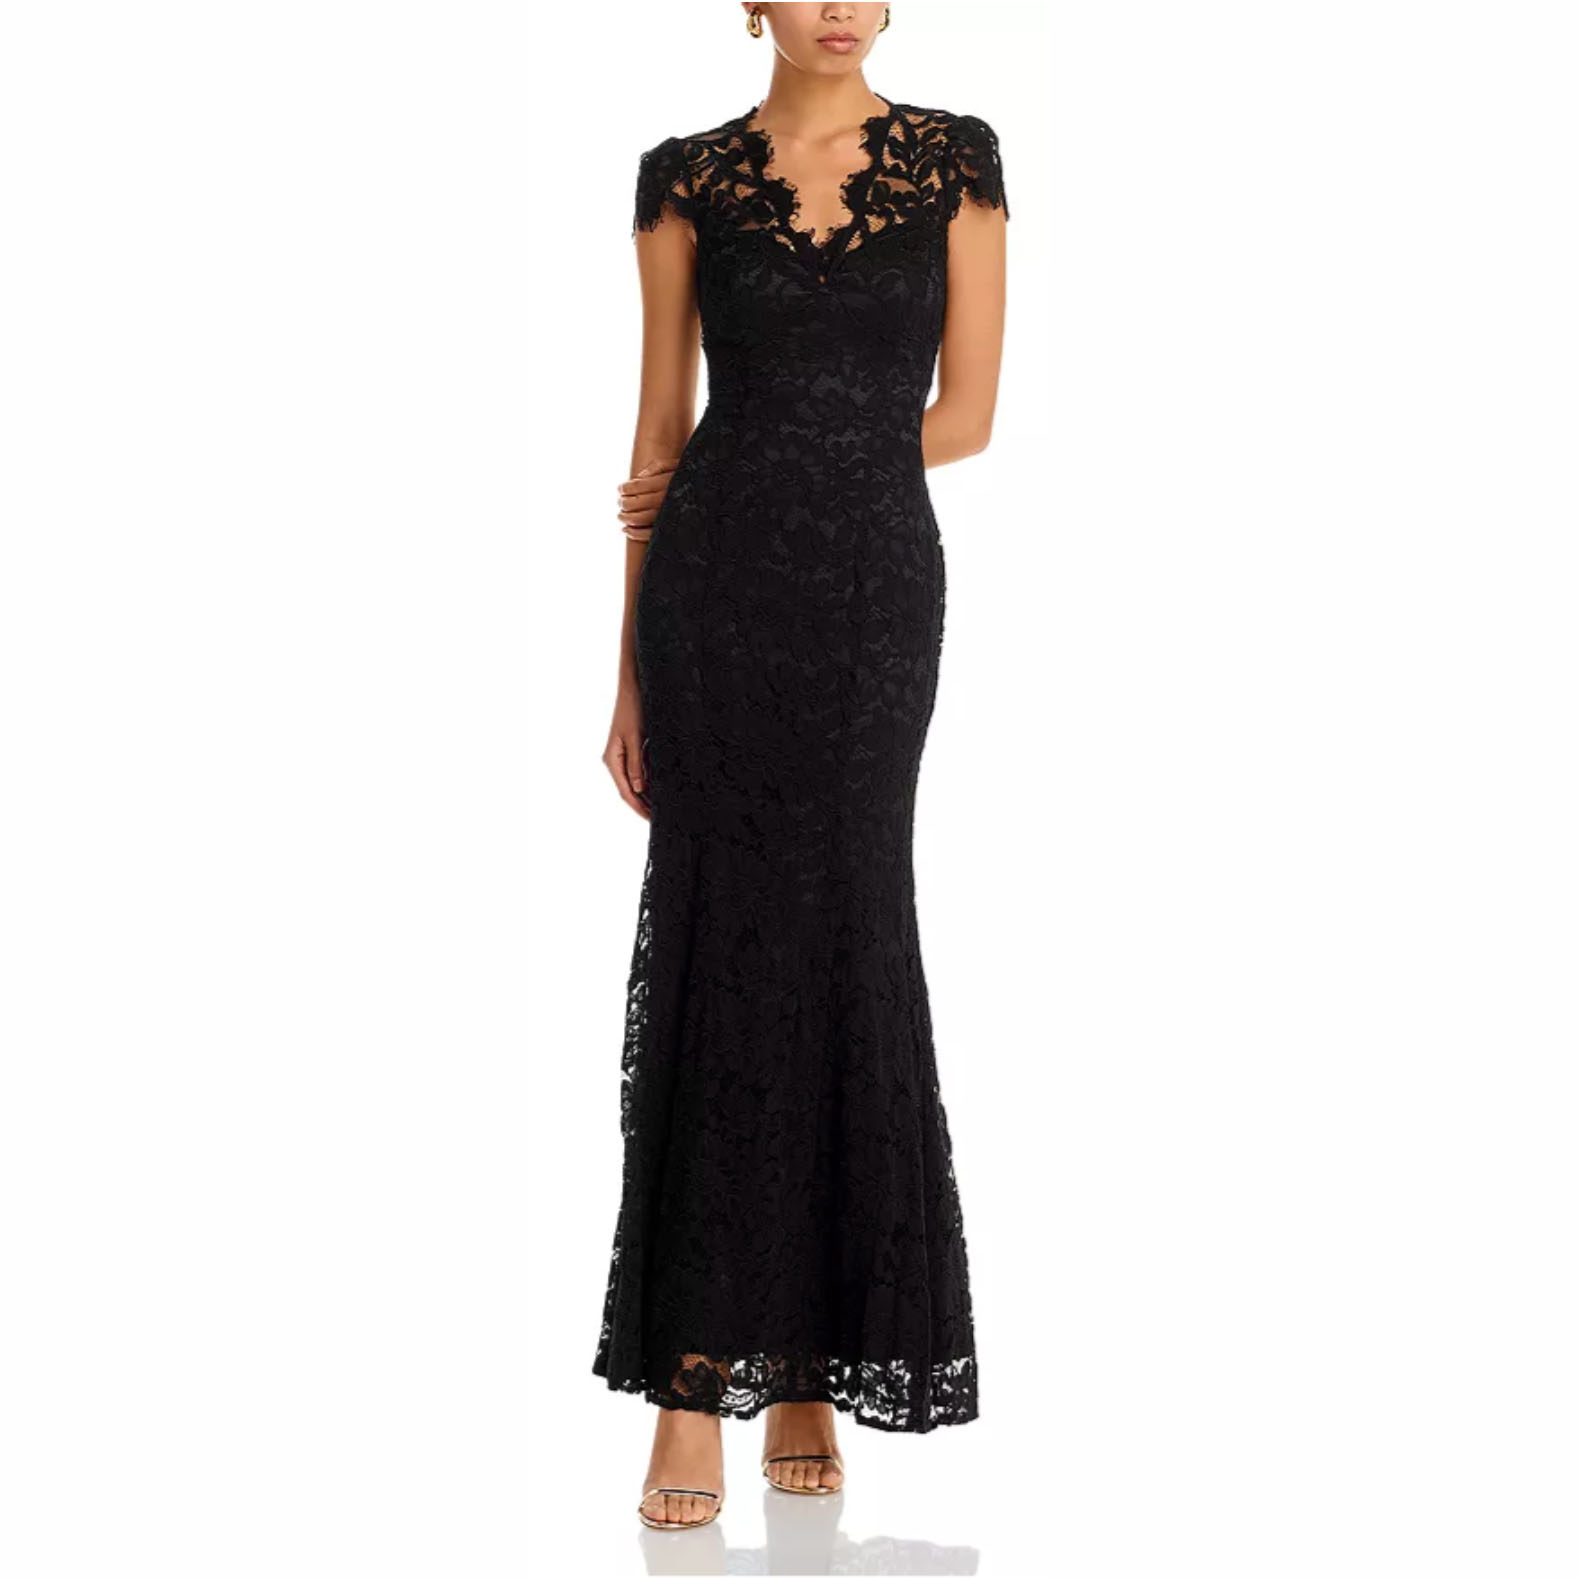 Black lacey long evening gown